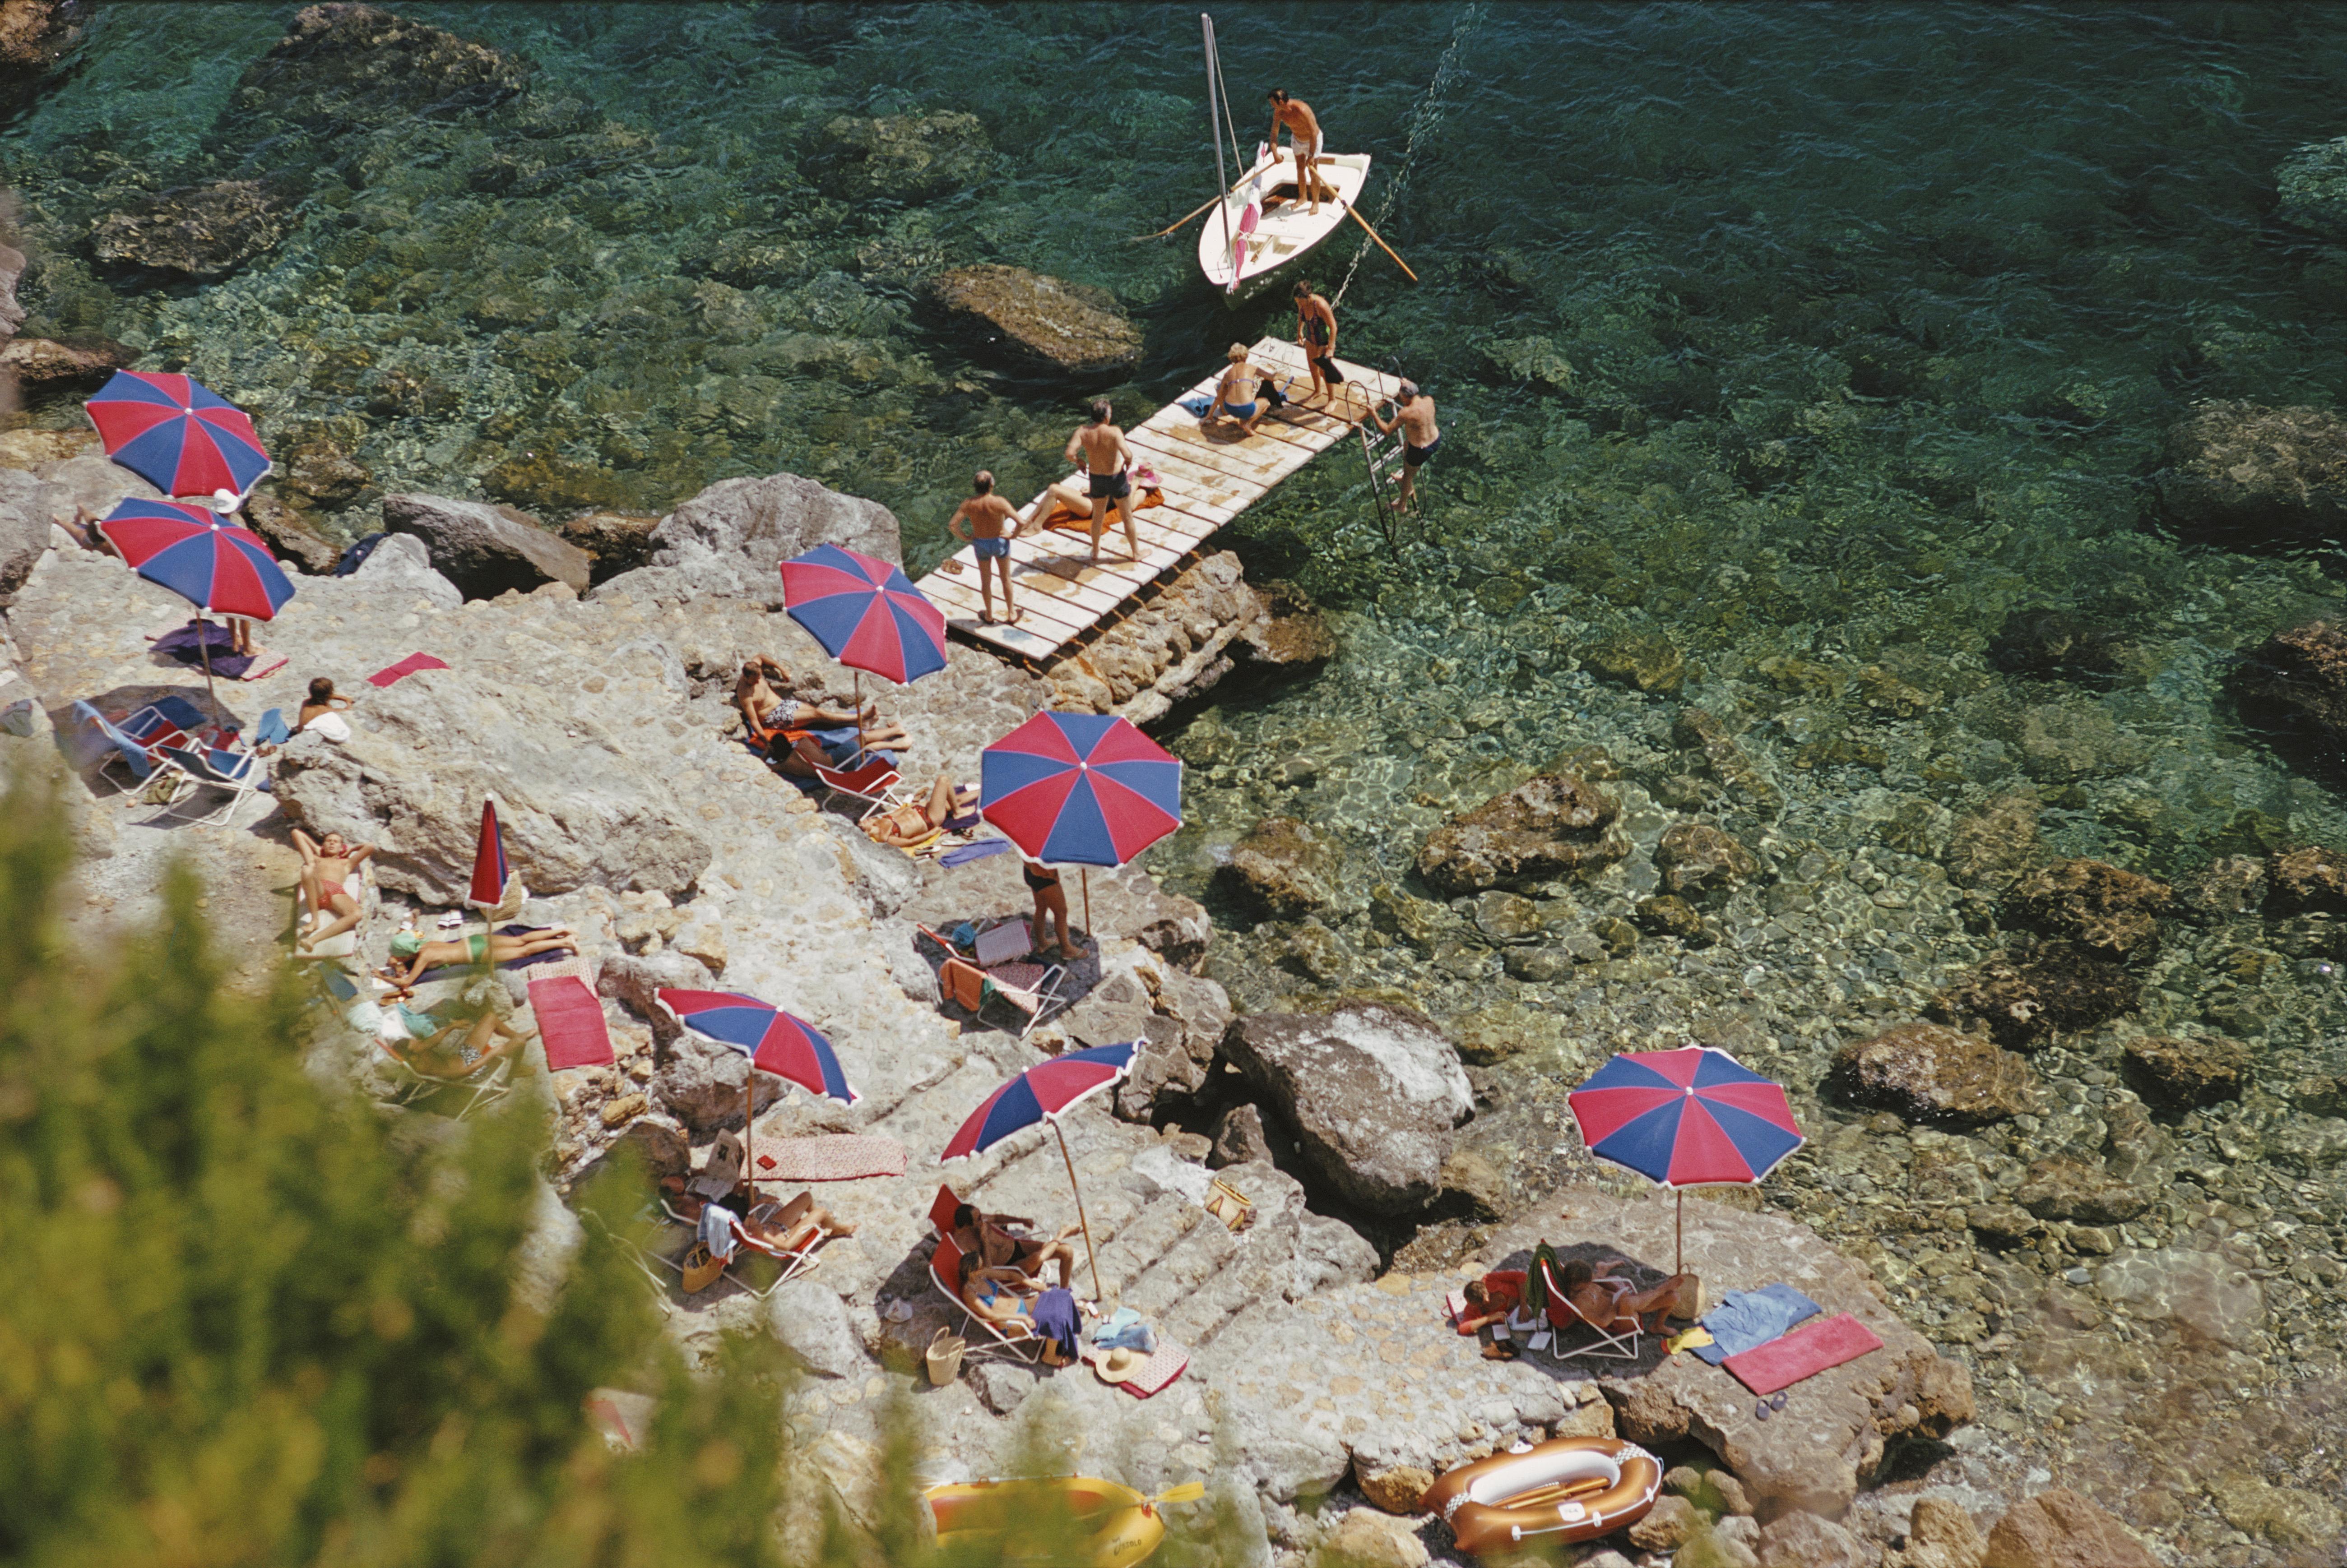 'Il Pellicano Beach' 1973 Slim Aarons Limited Estate Edition Print 
A jetty juts out from the rocky shoreline at the Hotel Il Pellicano in Porto Ercole, Tuscany, August 1973. 

Slim Aarons Chromogenic C print 
Printed Later 
Slim Aarons Estate